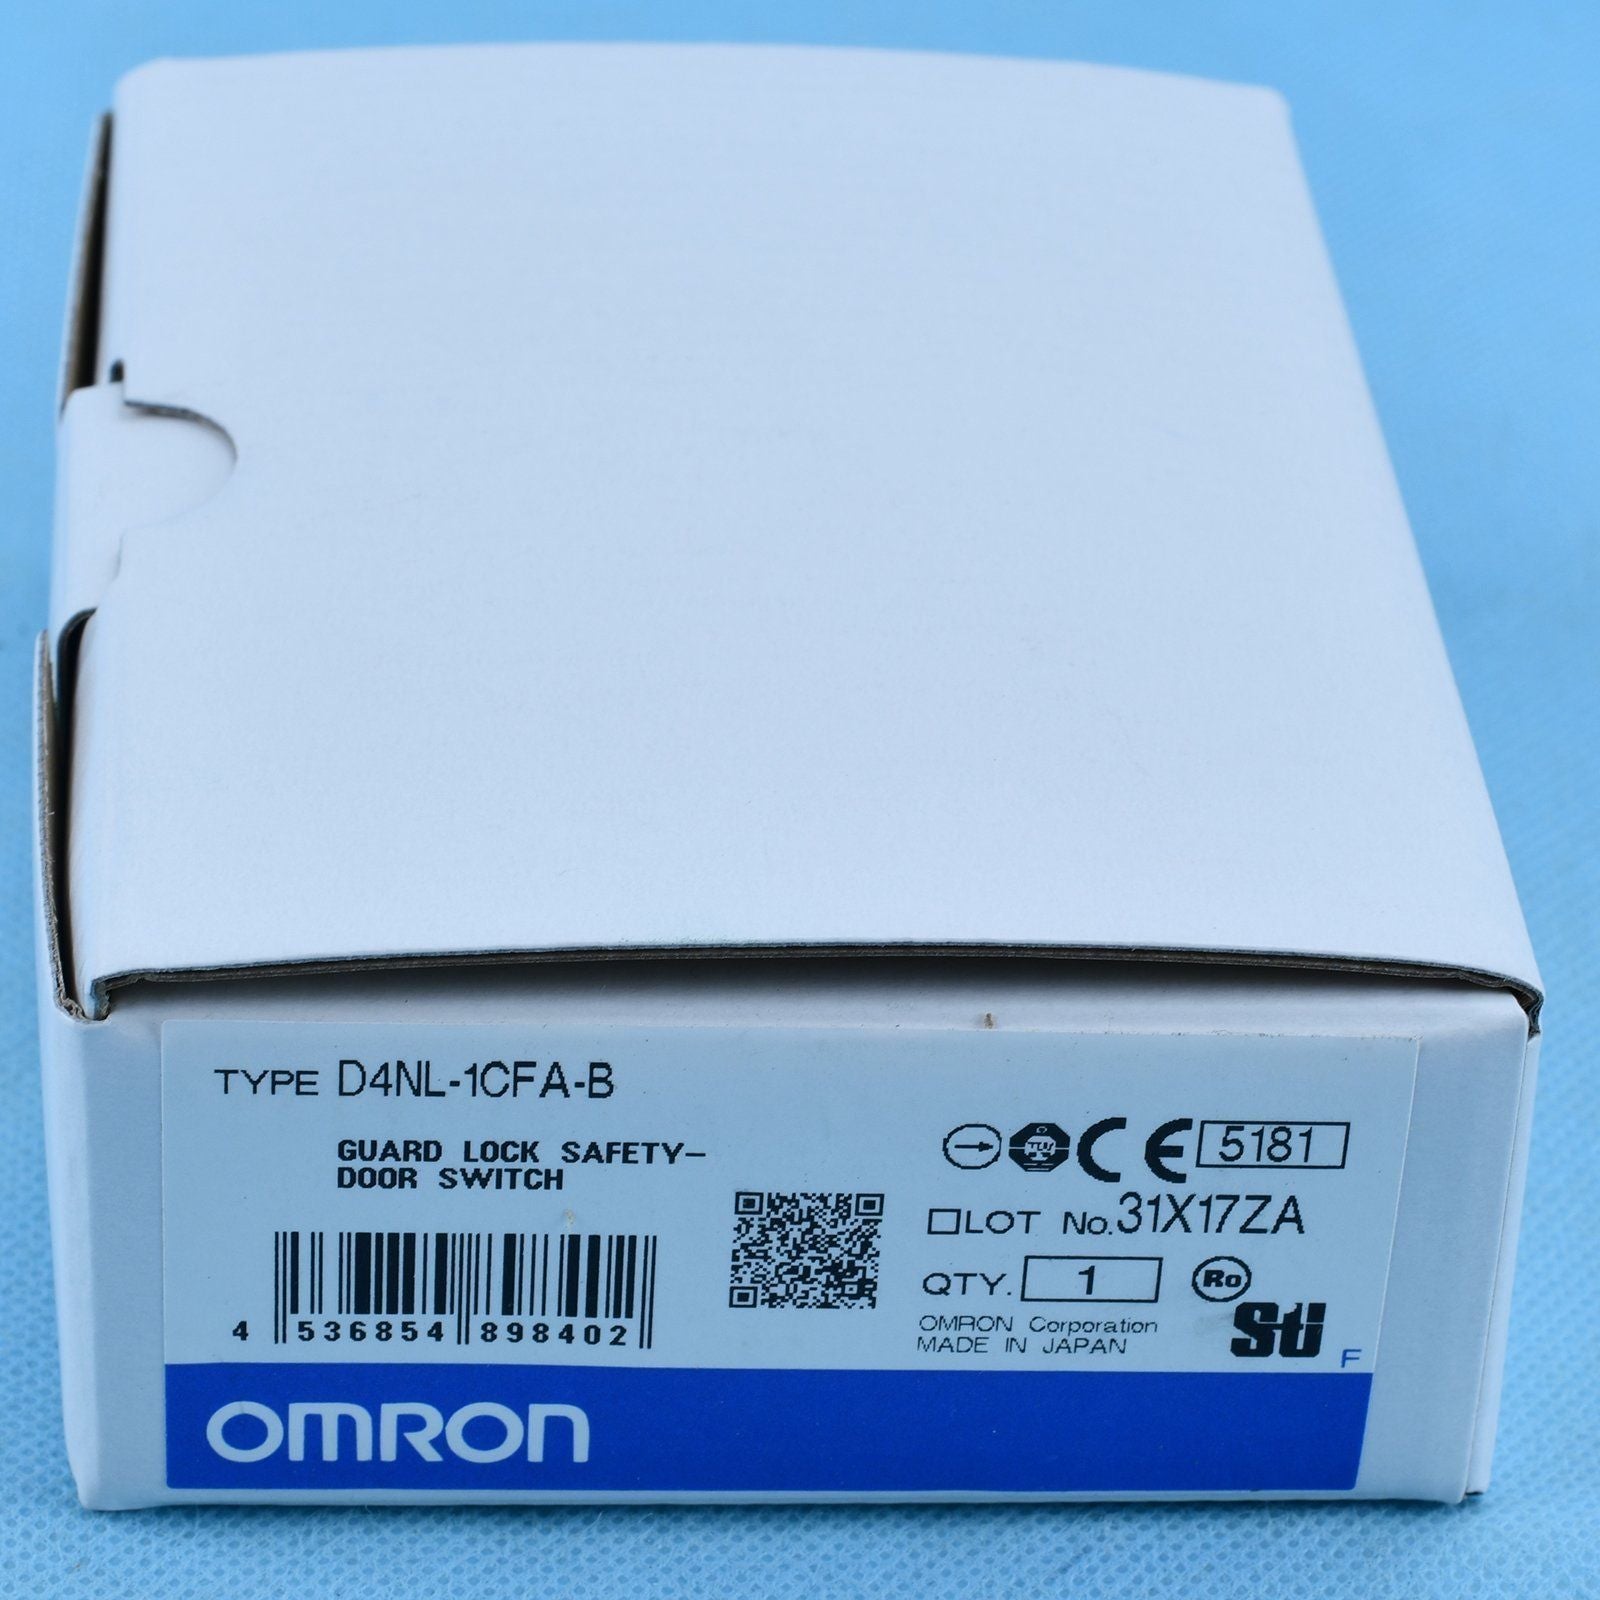 D4NL-1CFA-B KOEED 101-200, 80%, import_2020_10_10_031751, Omron, Other